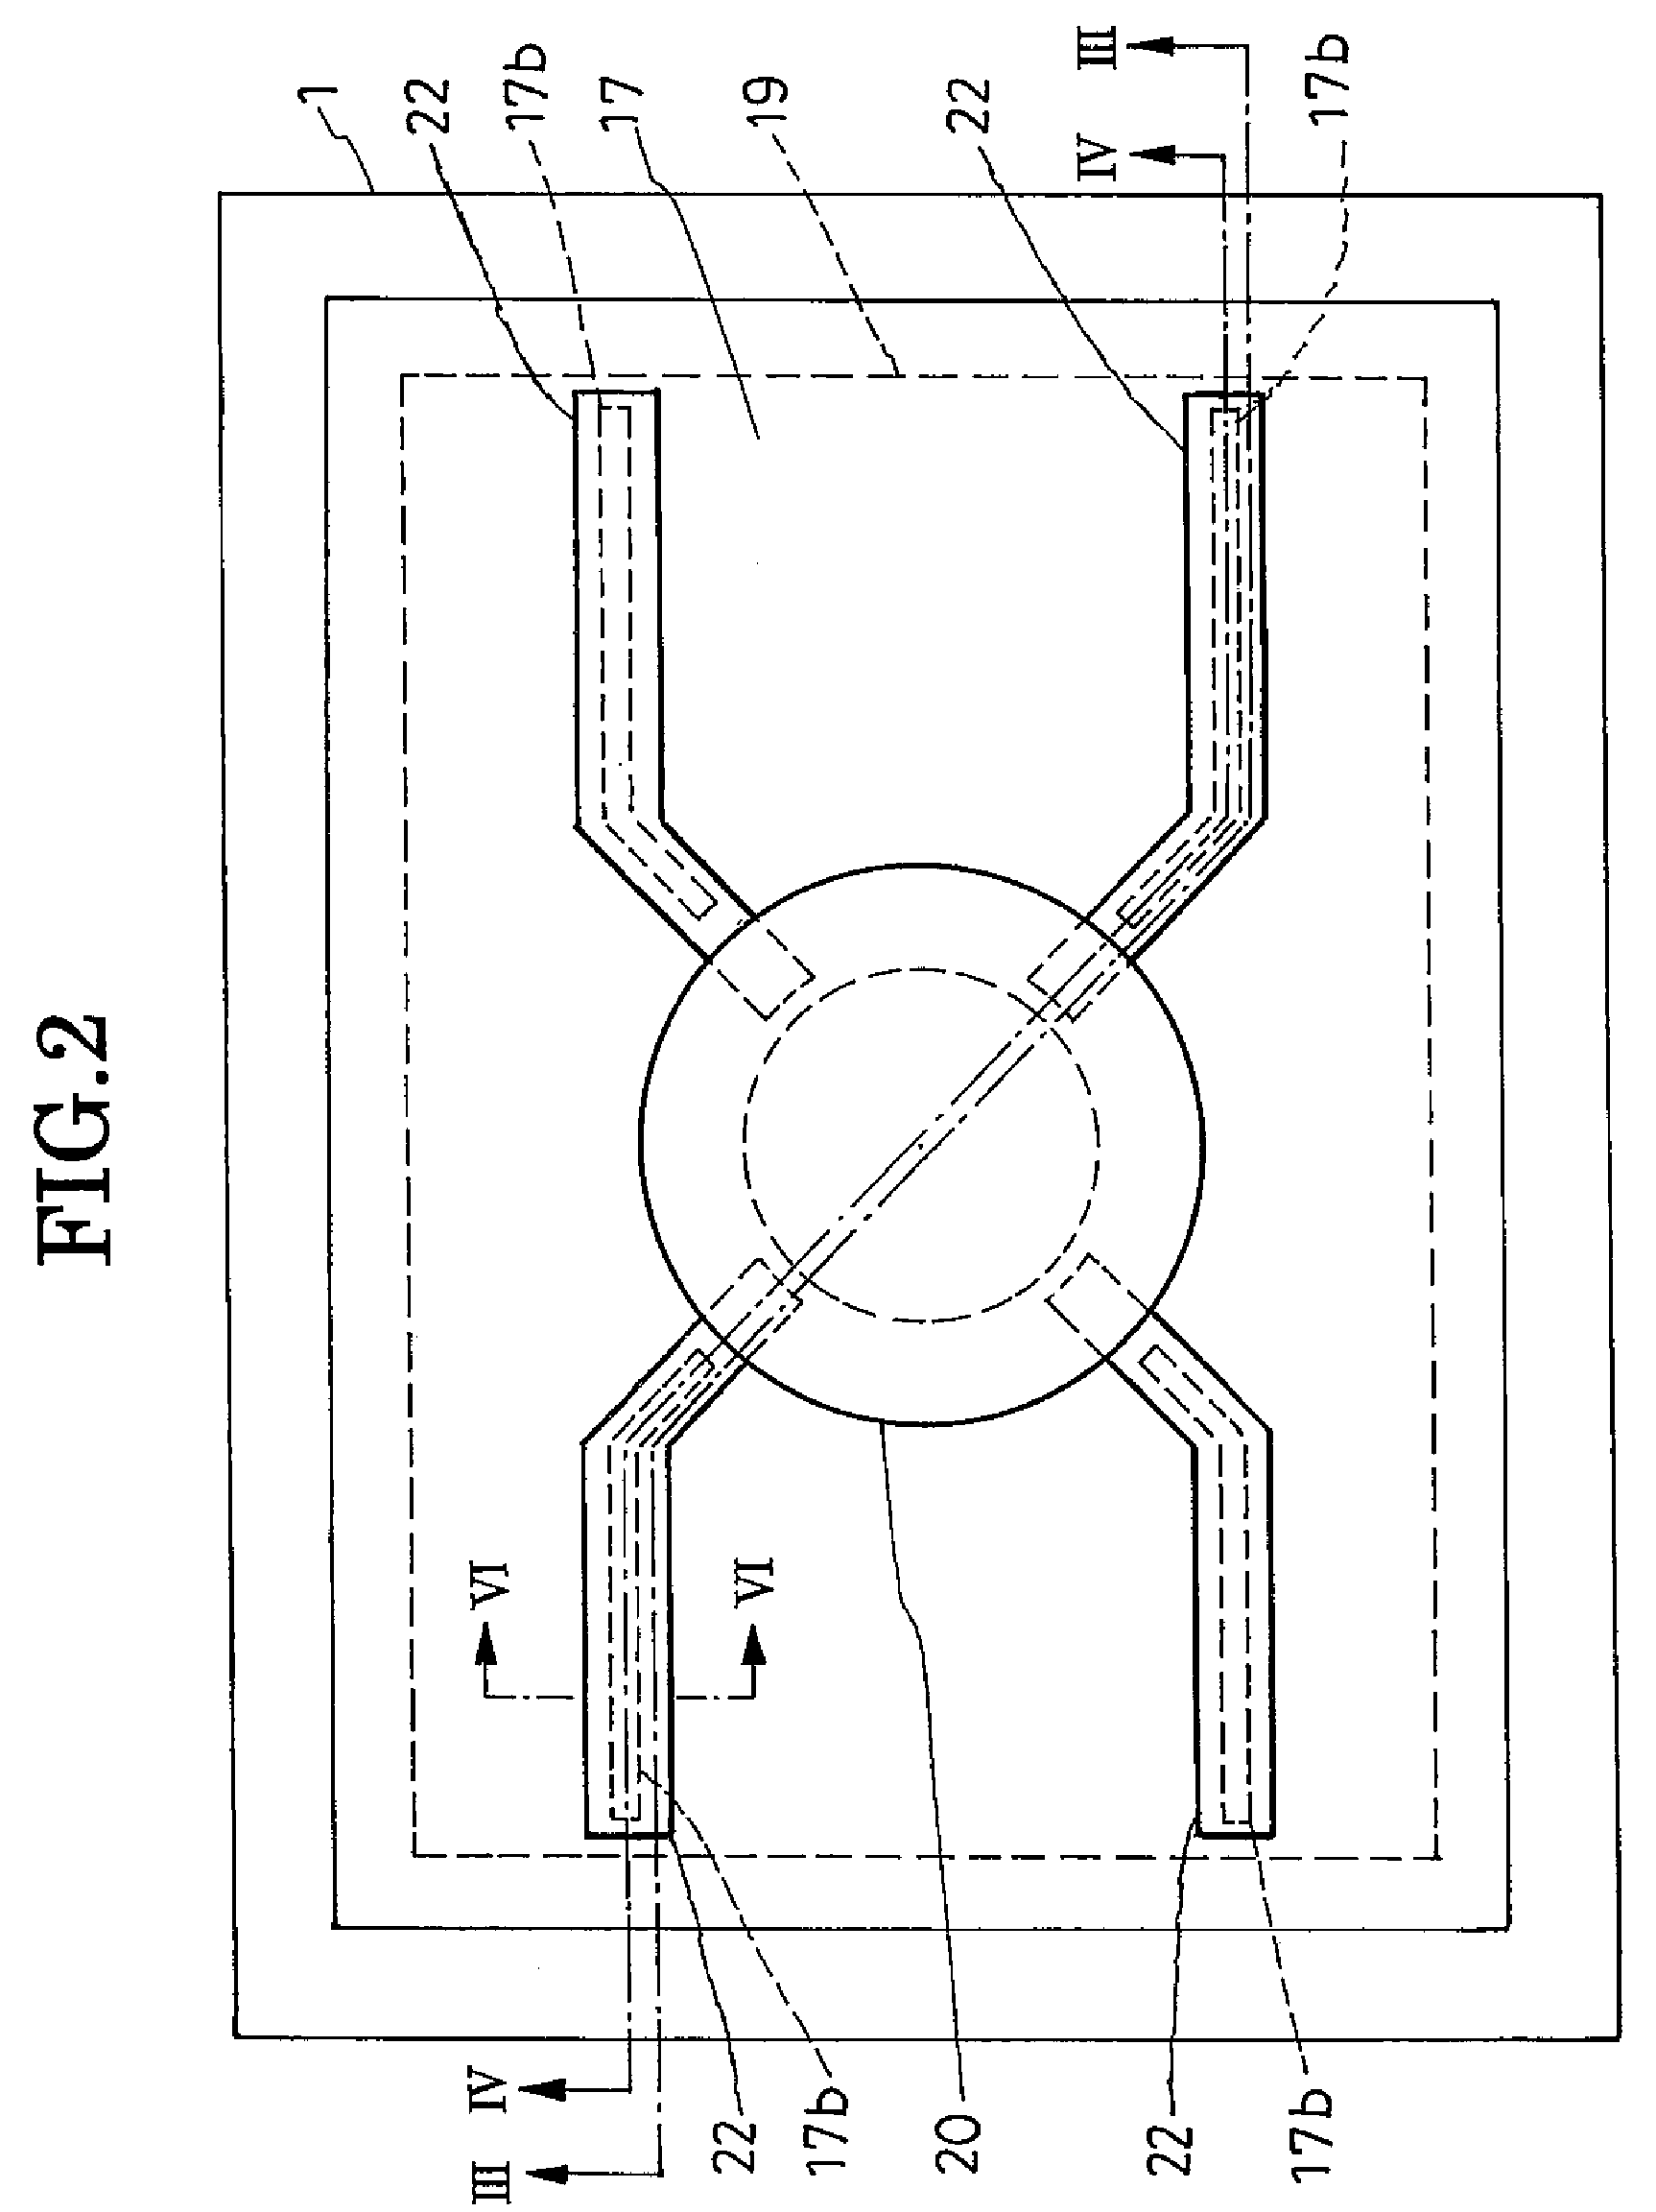 High-efficiency, overvoltage-protected, light-emitting semiconductor device